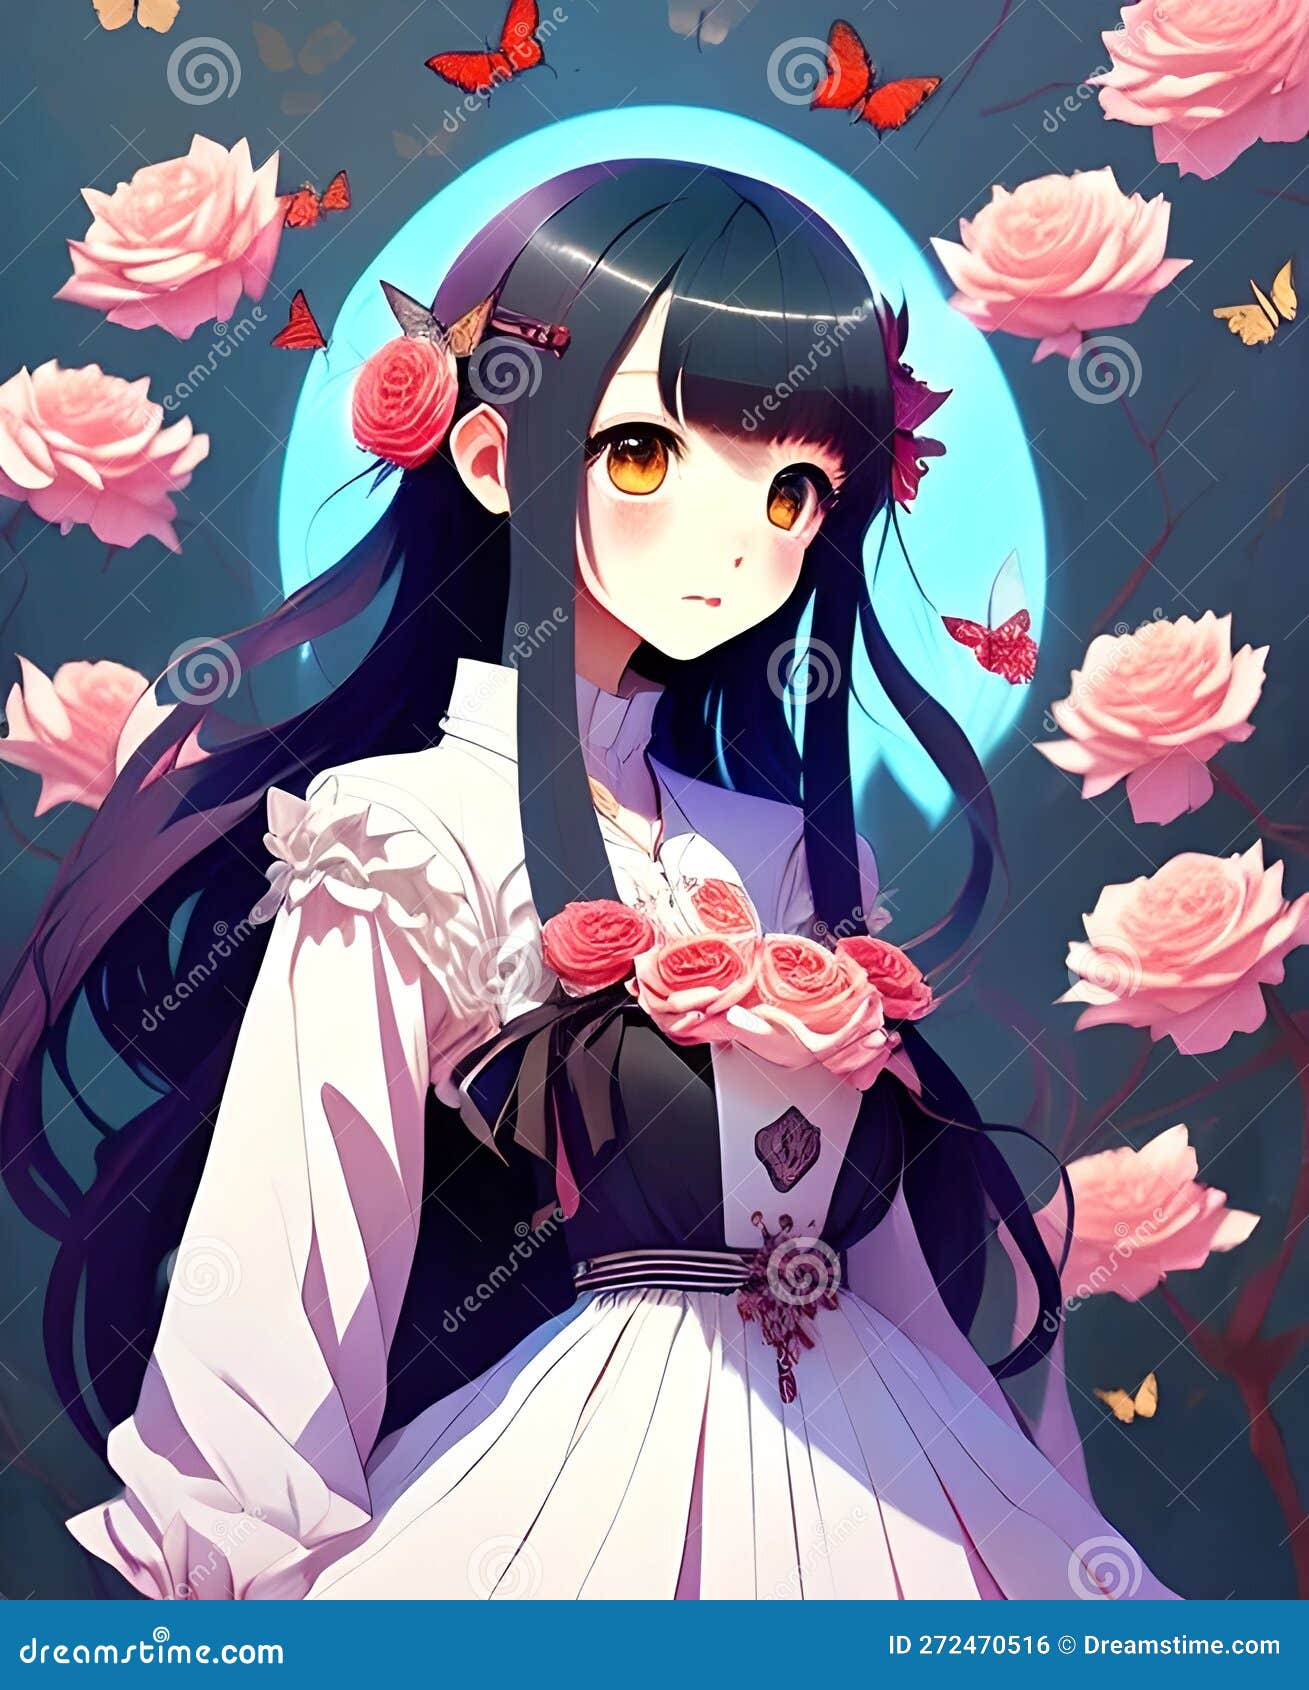 Share 72+ anime girl with flowers latest - in.cdgdbentre-demhanvico.com.vn